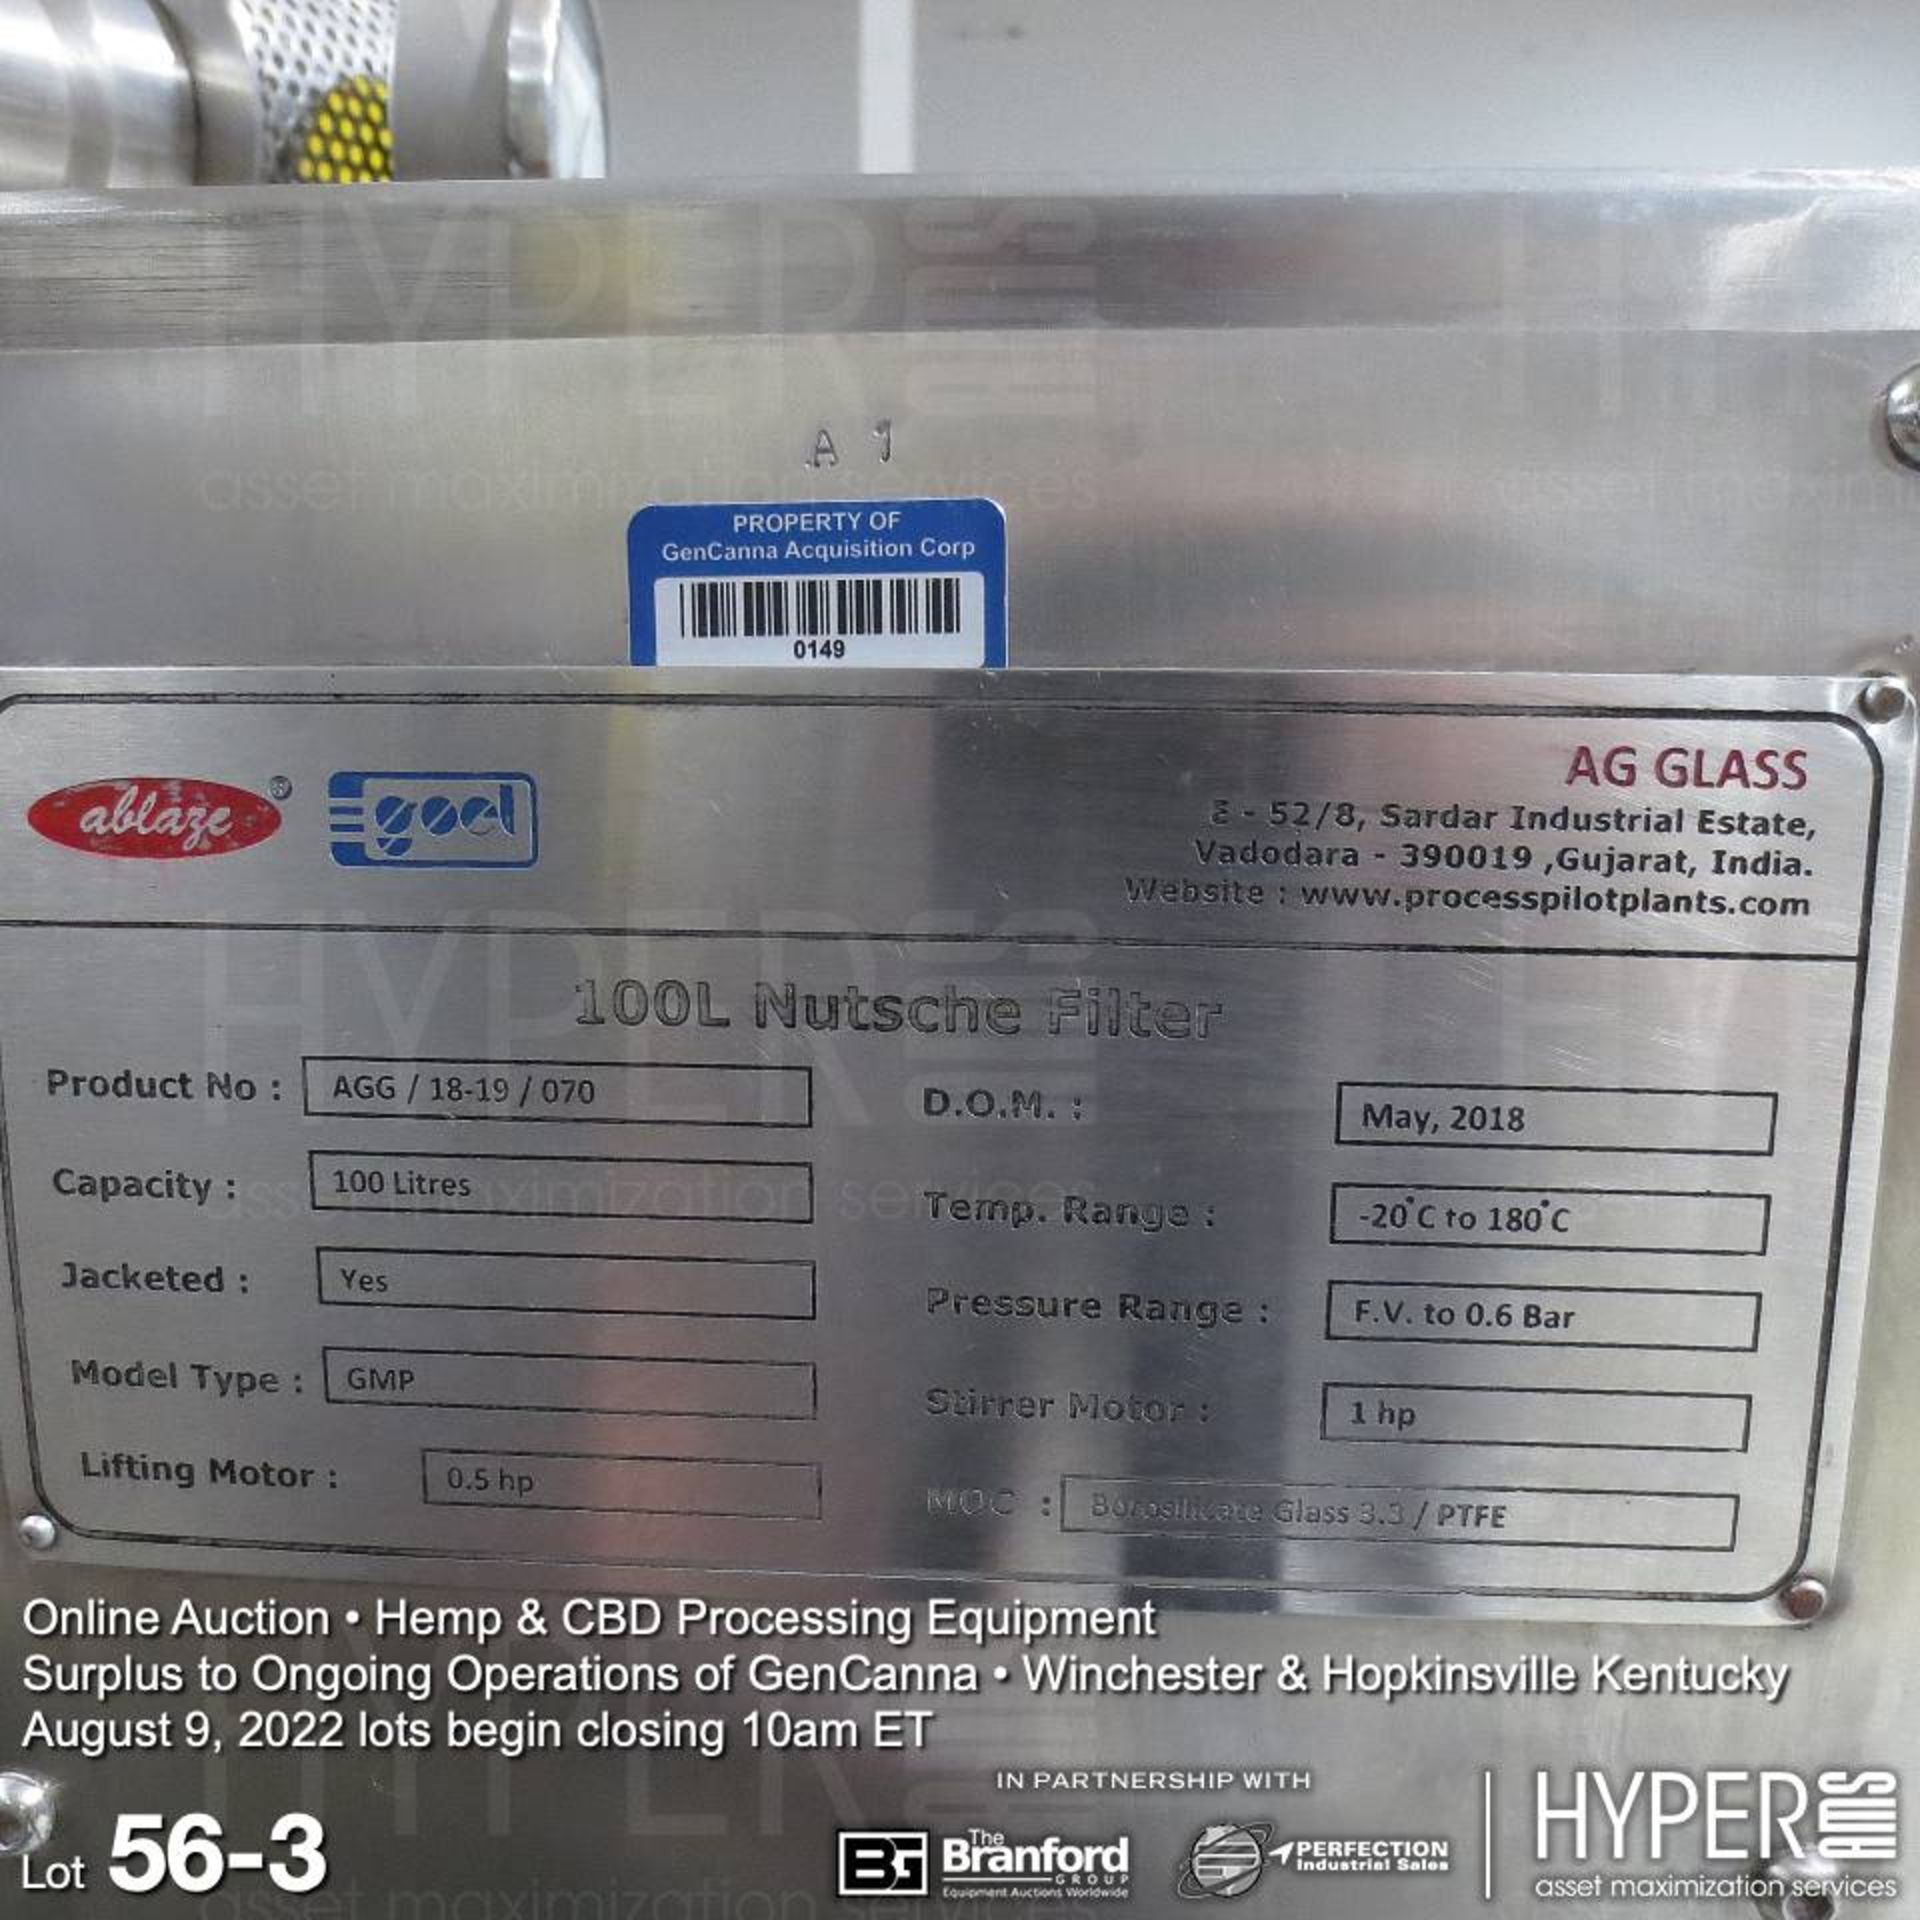 AG Glass AGG/18-19/070 100-liter GMP nutsche filter - Image 3 of 4